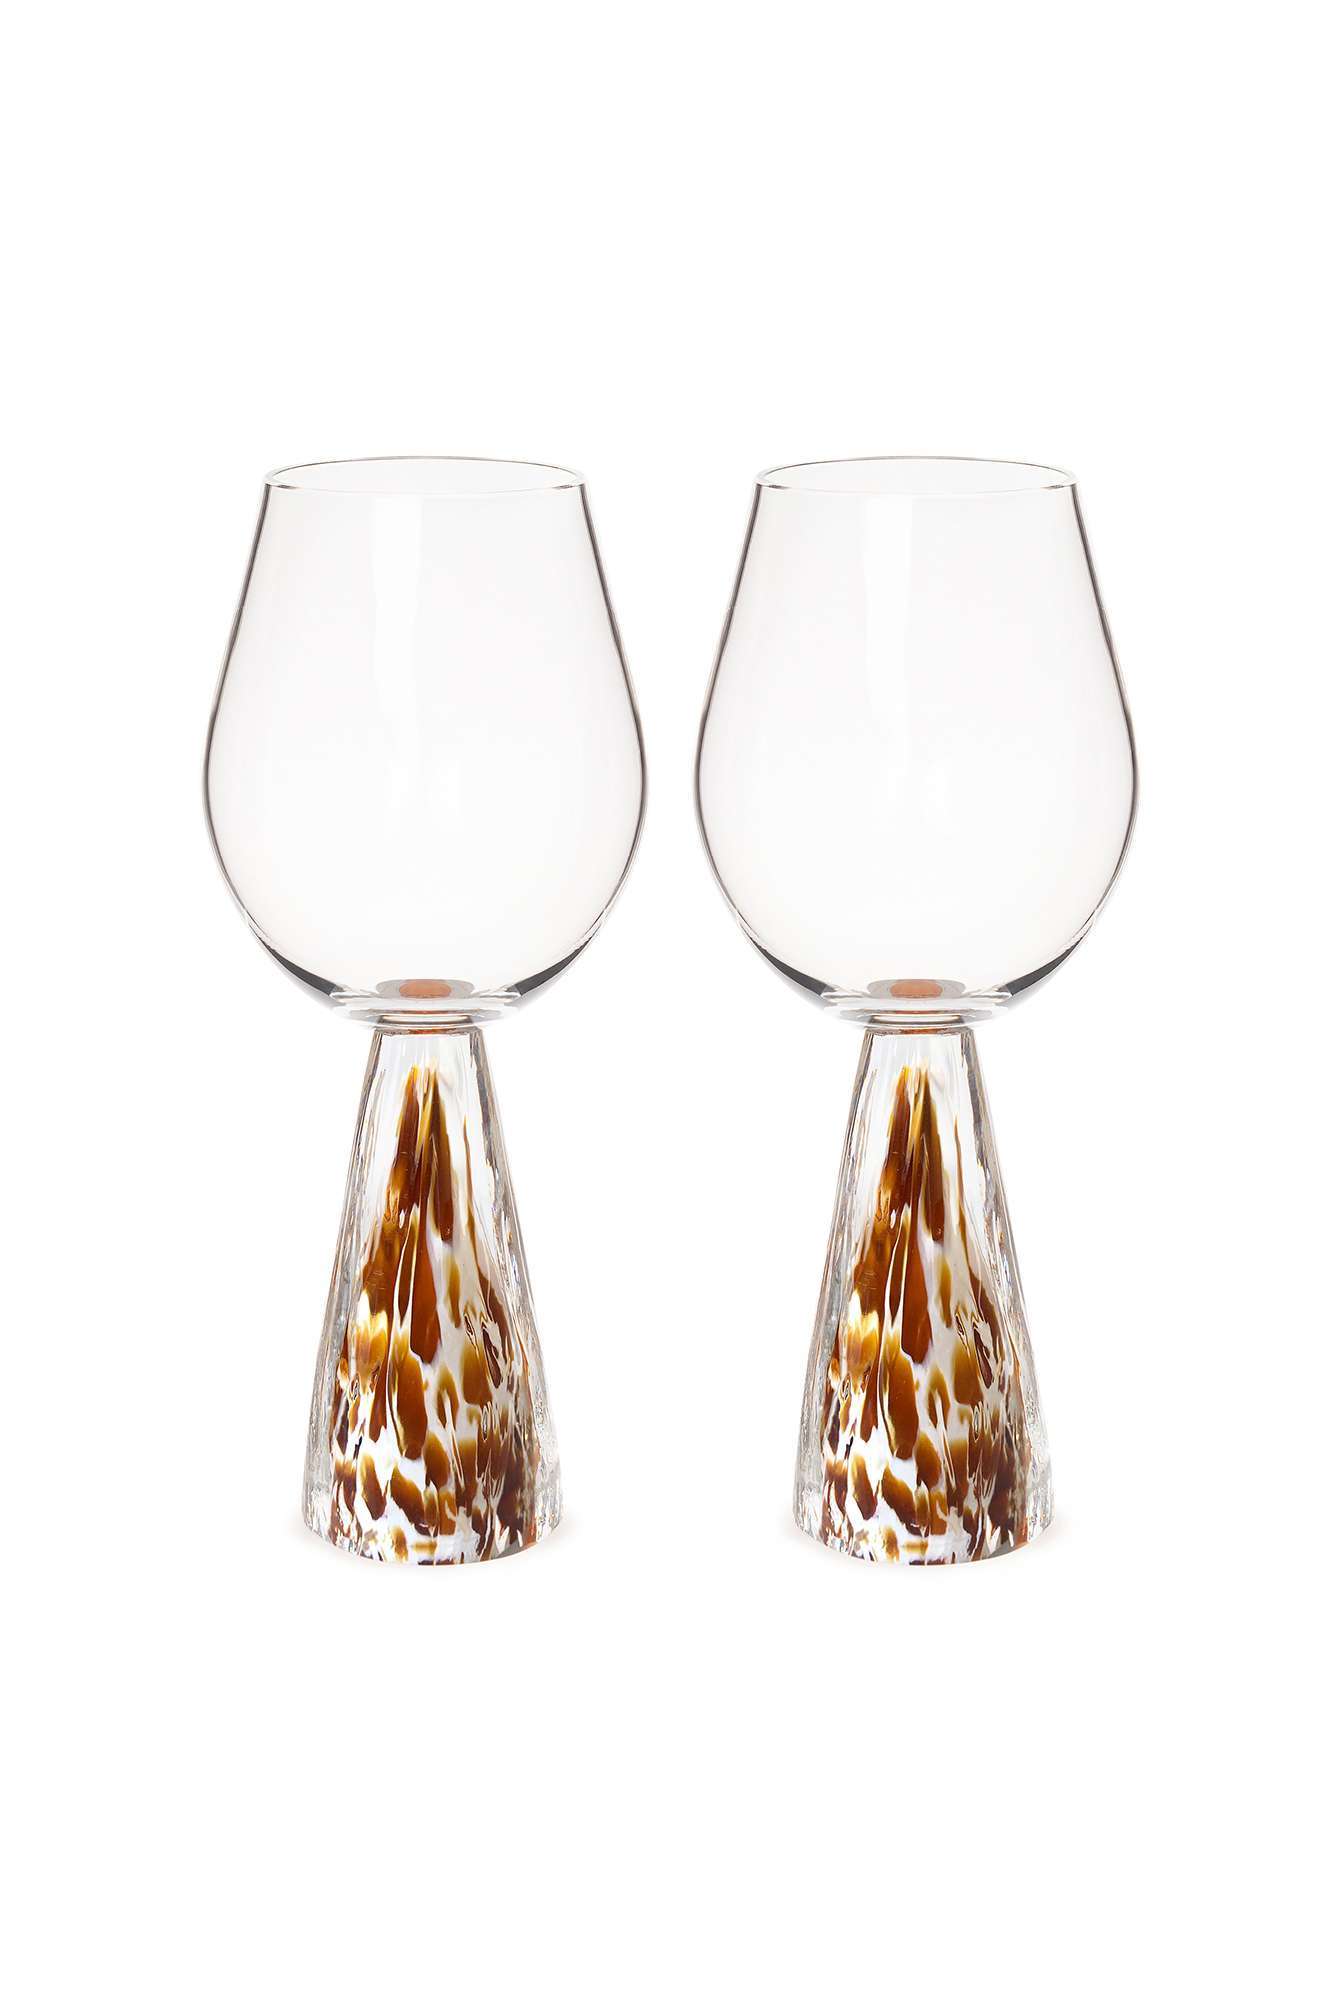 Stories-of-Italy-Tempo-Ivory-and-Karkade-Goblets-Set-of-2-Clear-cut